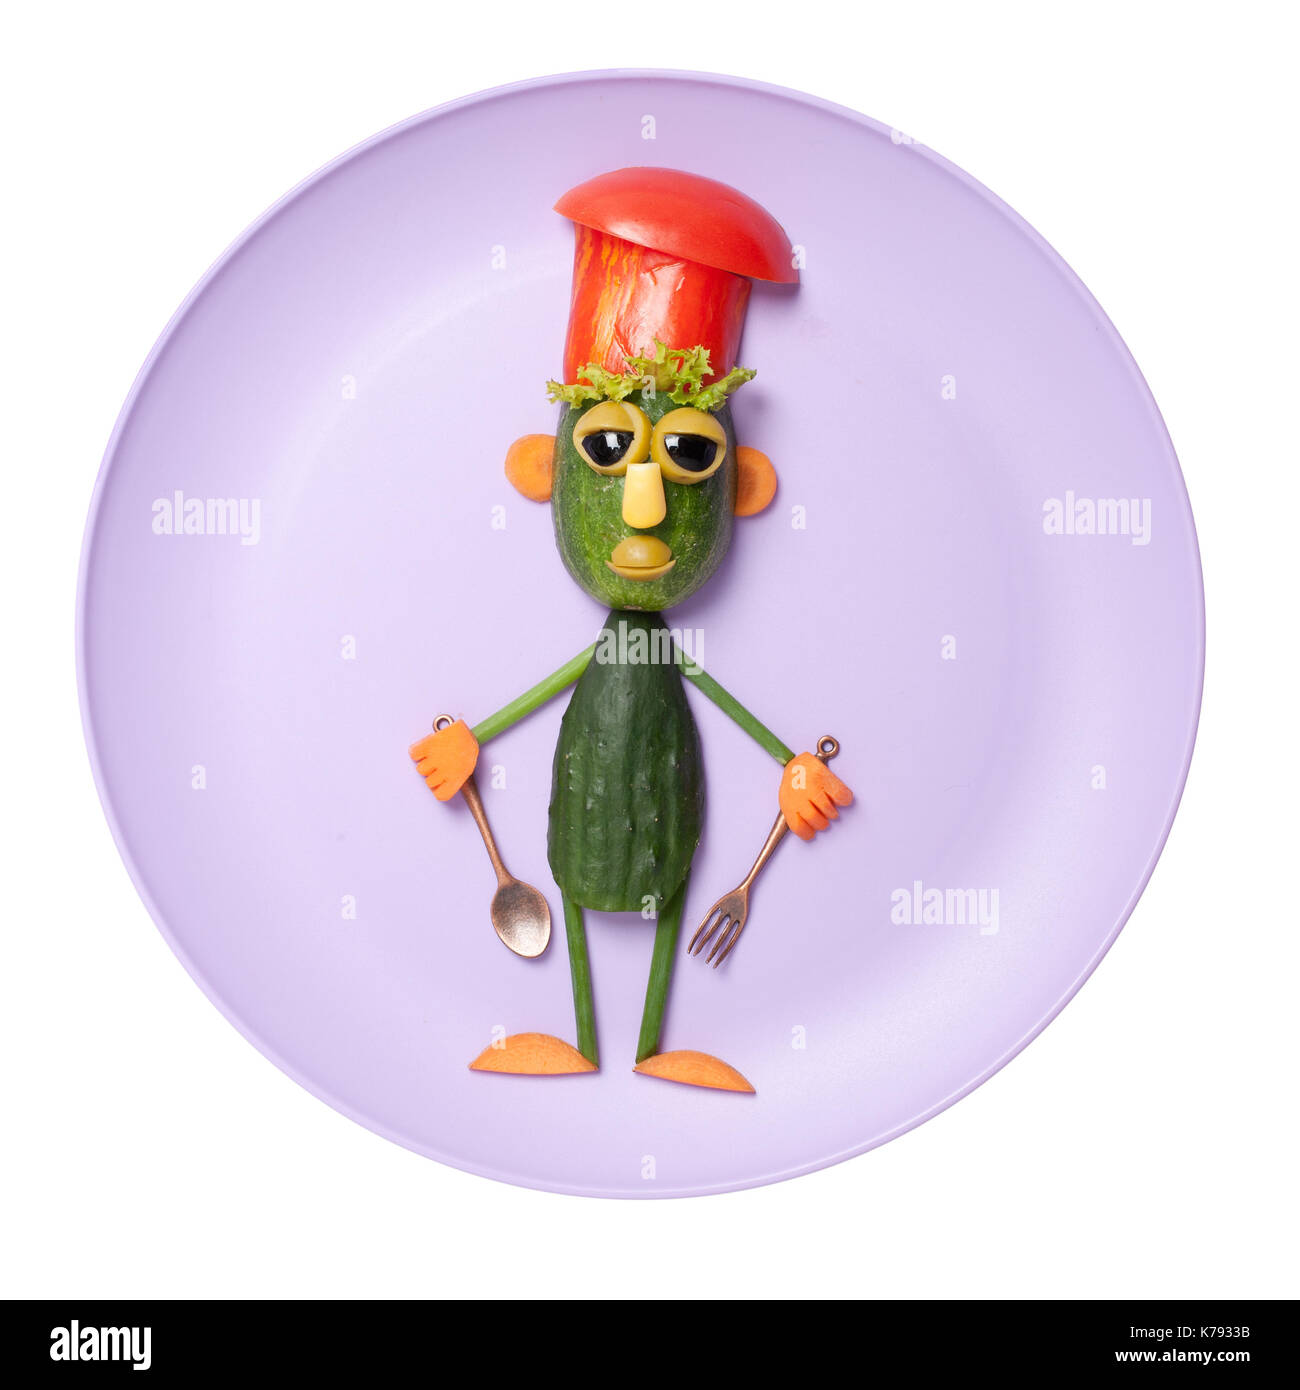 Funny cucumber chief made on purple plate Stock Photo